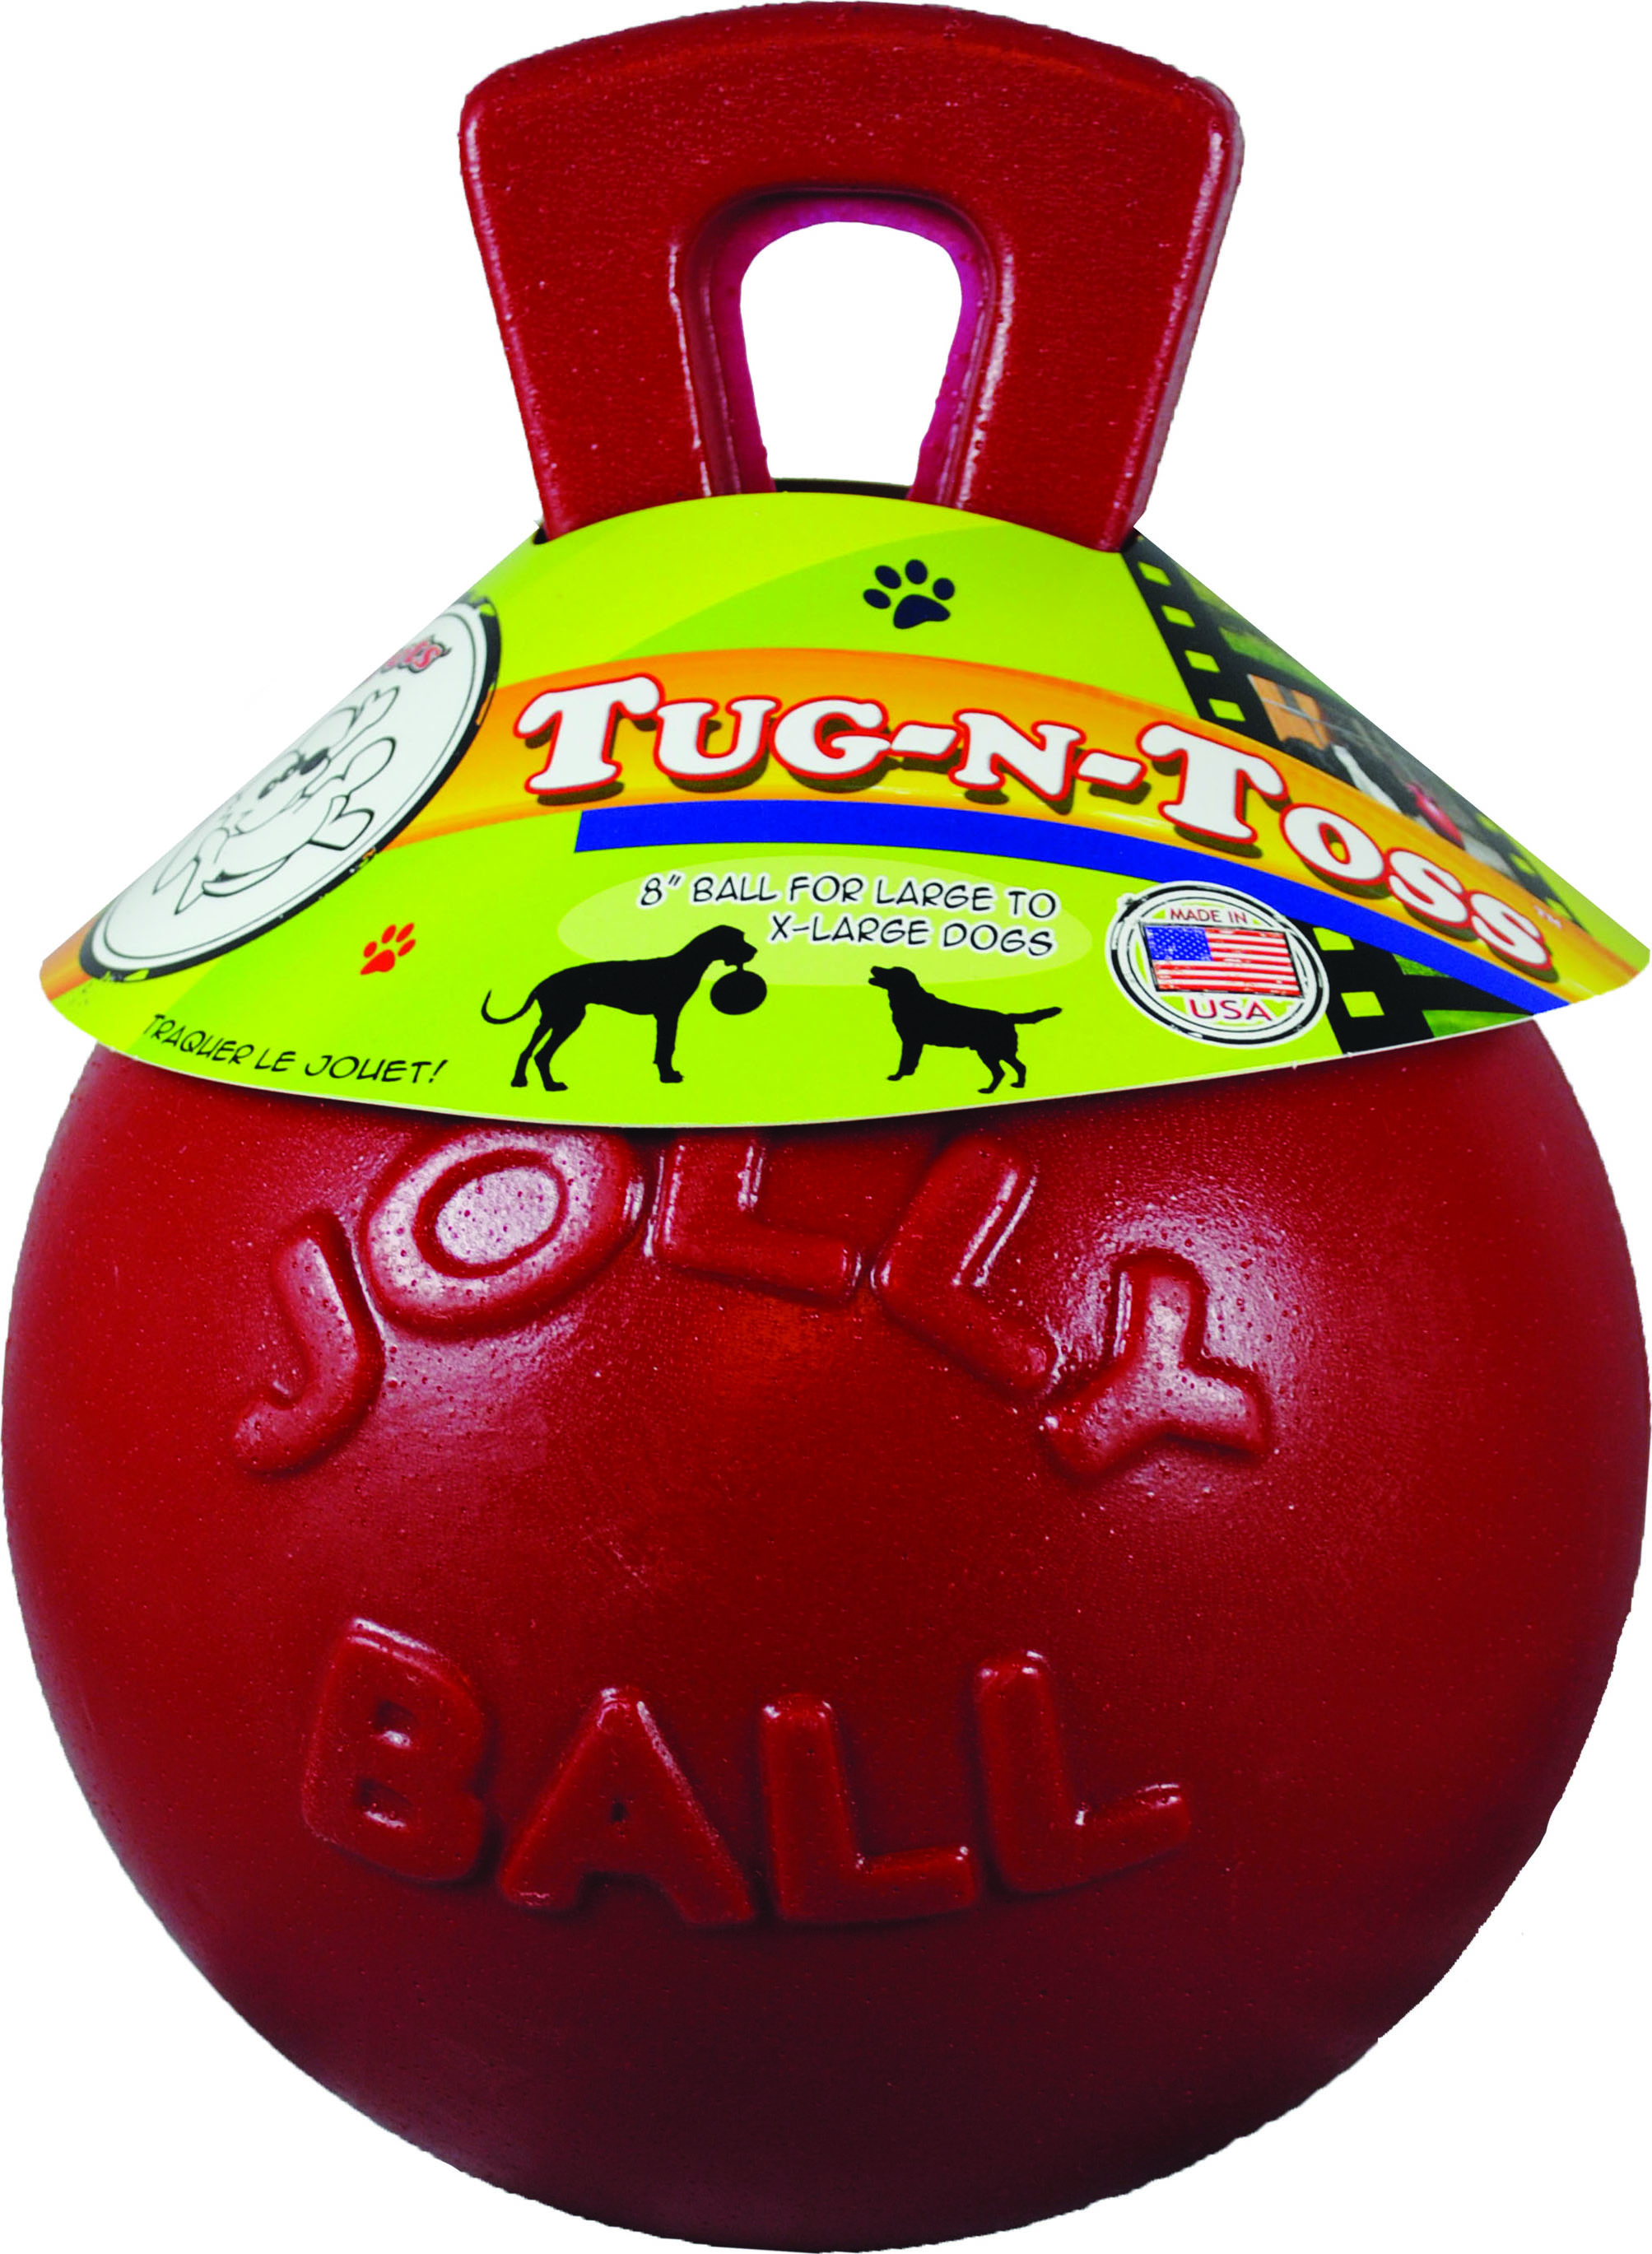 Red Tug-N-Toss ball - 4.5 in dog toy